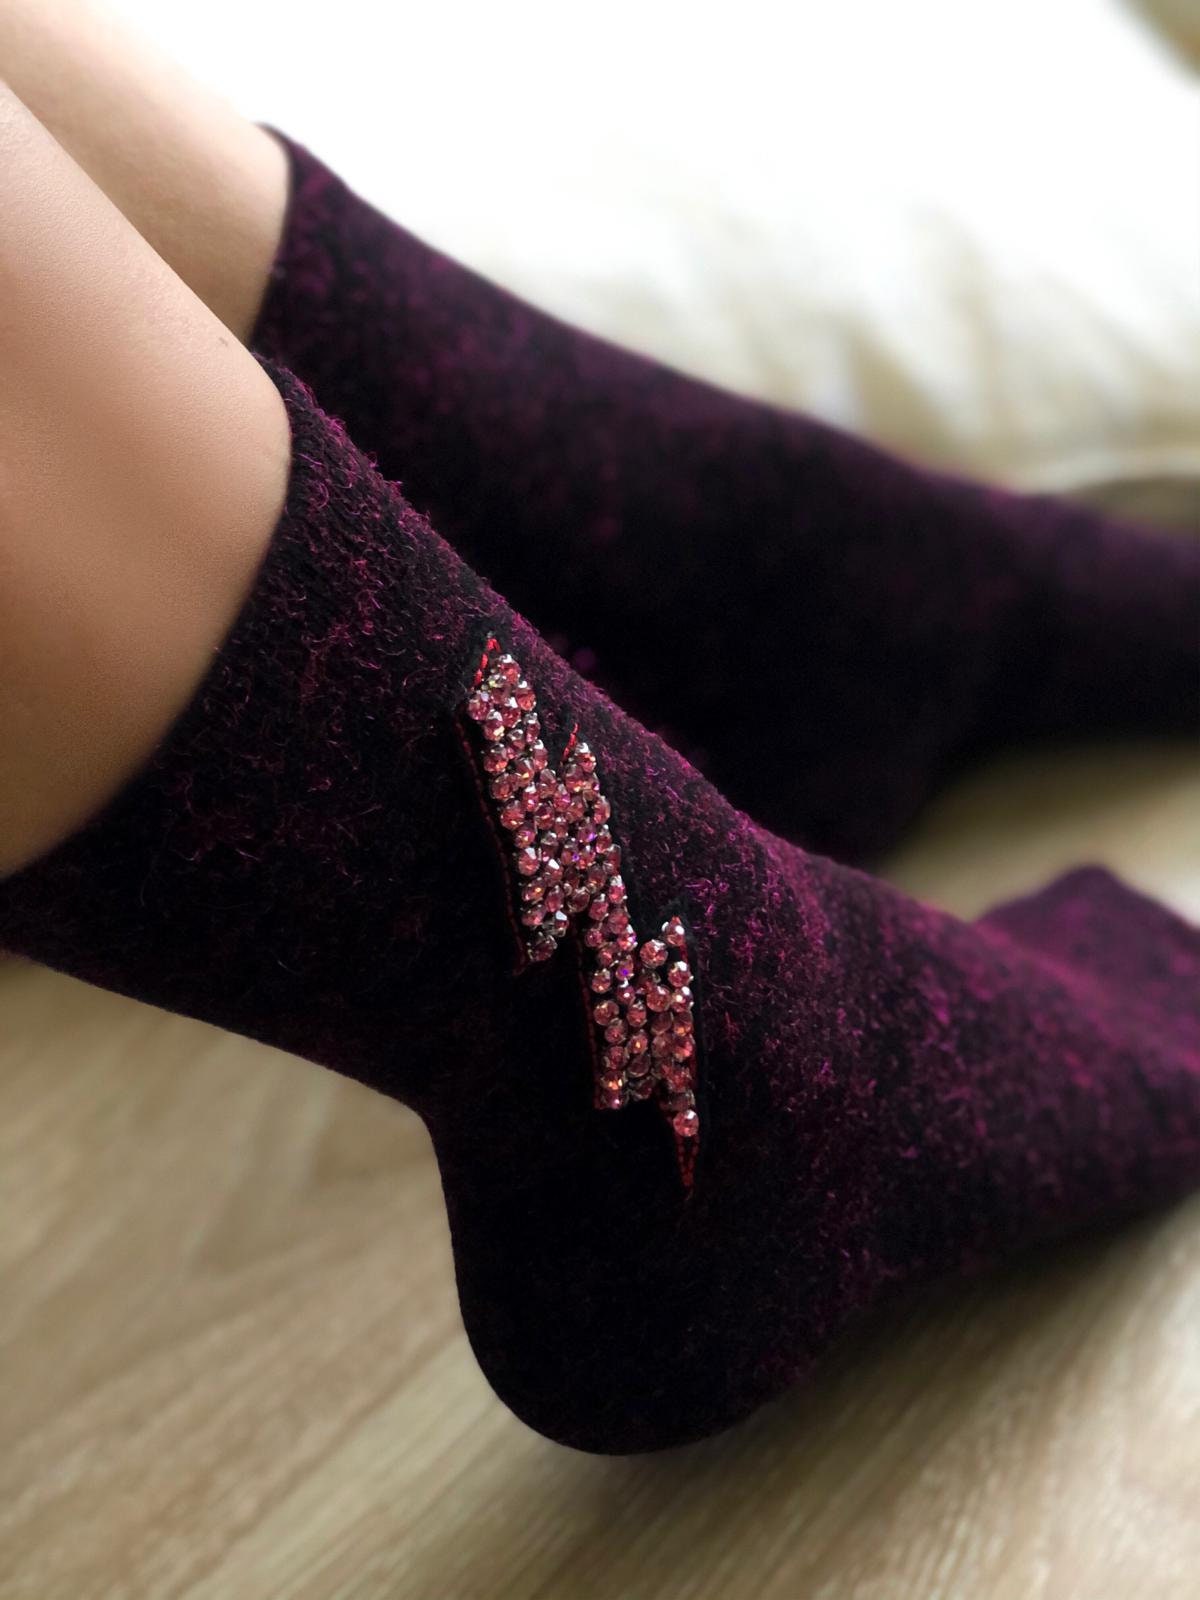 Stand out from the crowd with these electric effect burgundy socks embellished with pink crystals, perfect for adding sparkle and style to your feet.